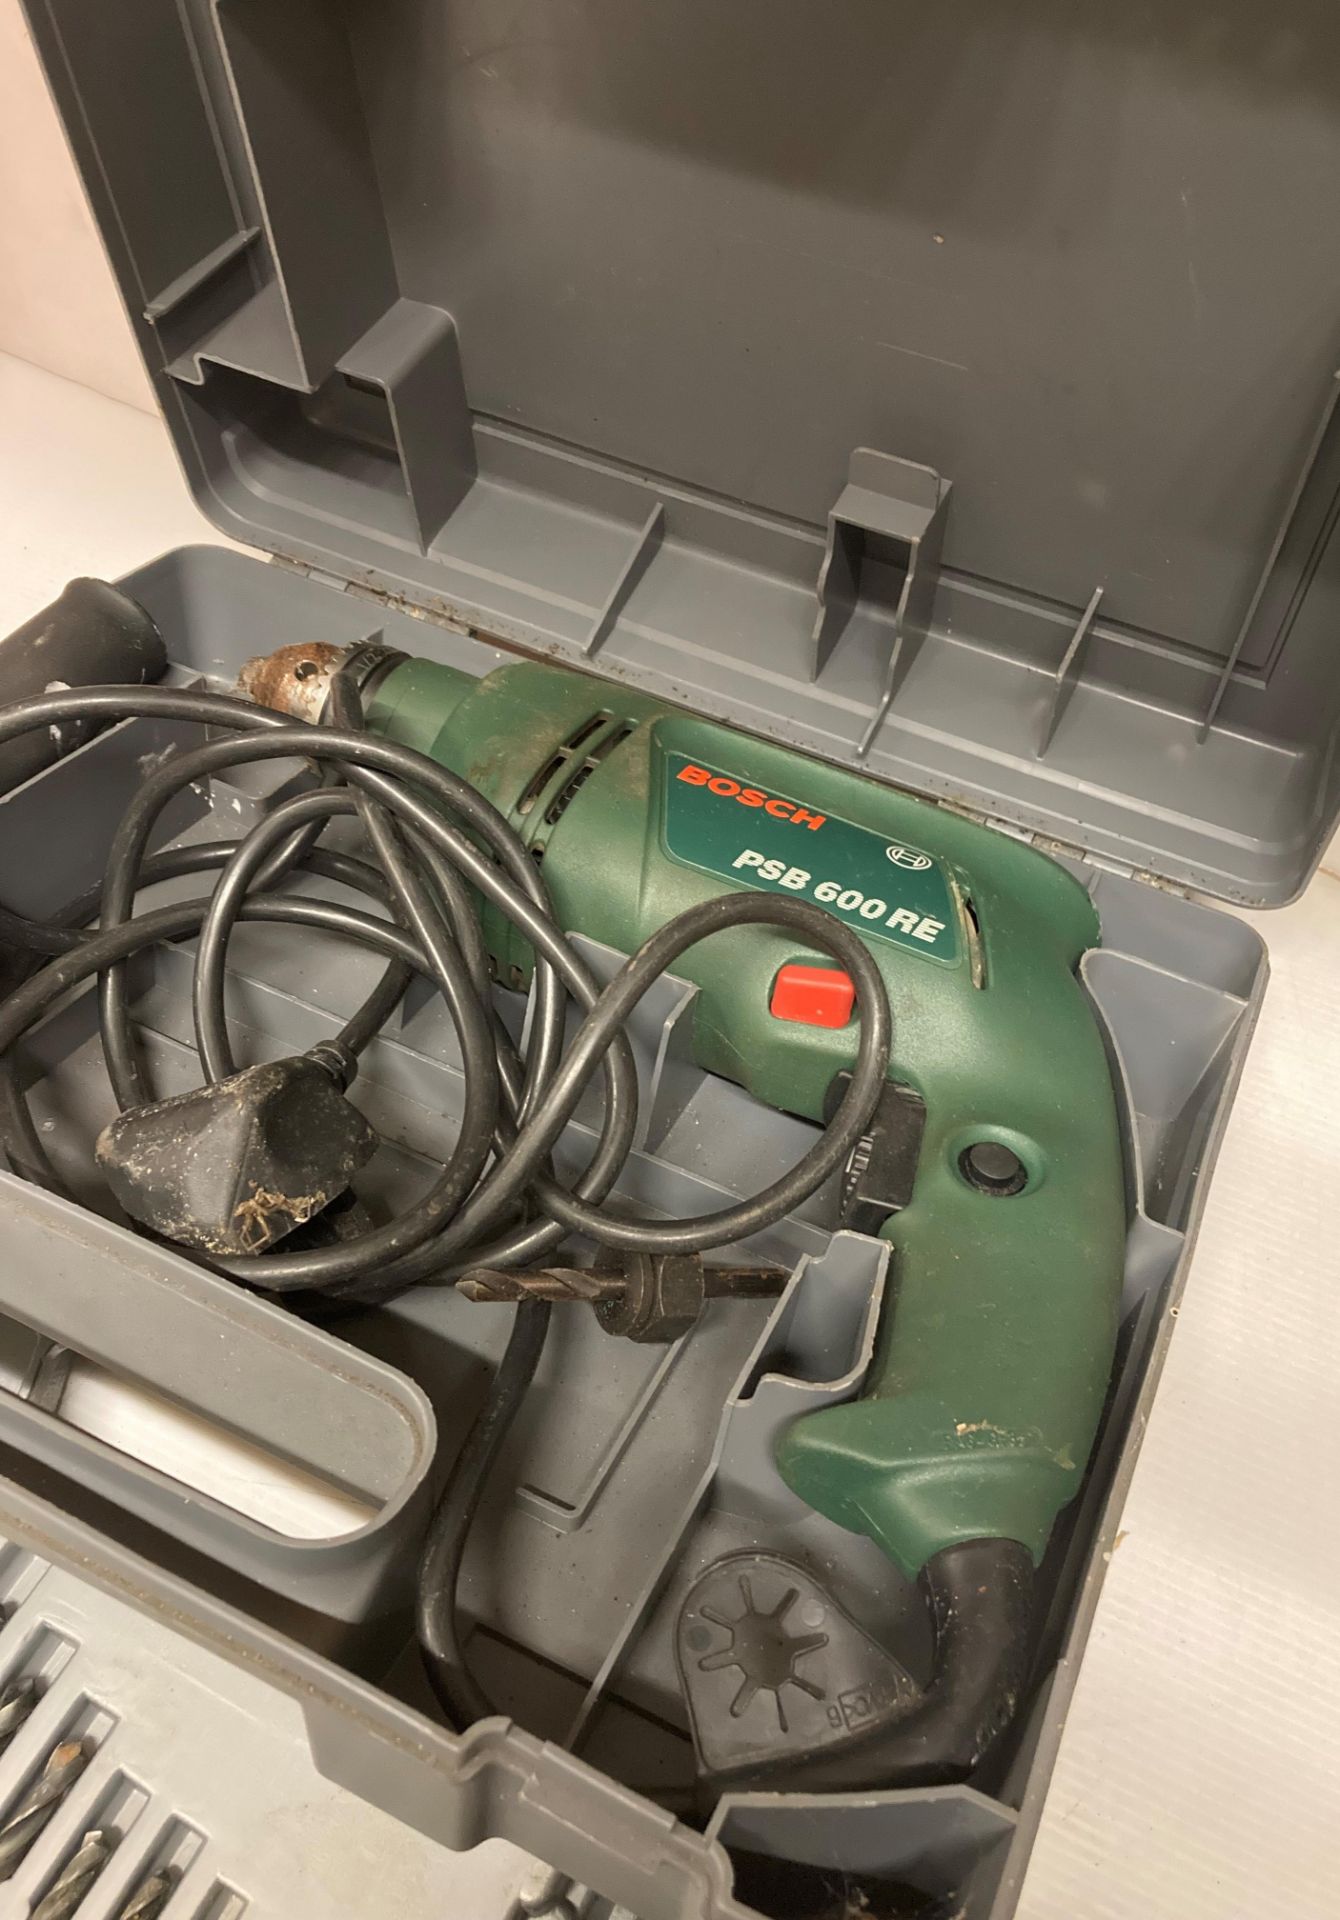 Bosch PSB600RE (240v) hammer-drill in case and a 49-piece Bosch drill bit set in case (saleroom - Image 2 of 2